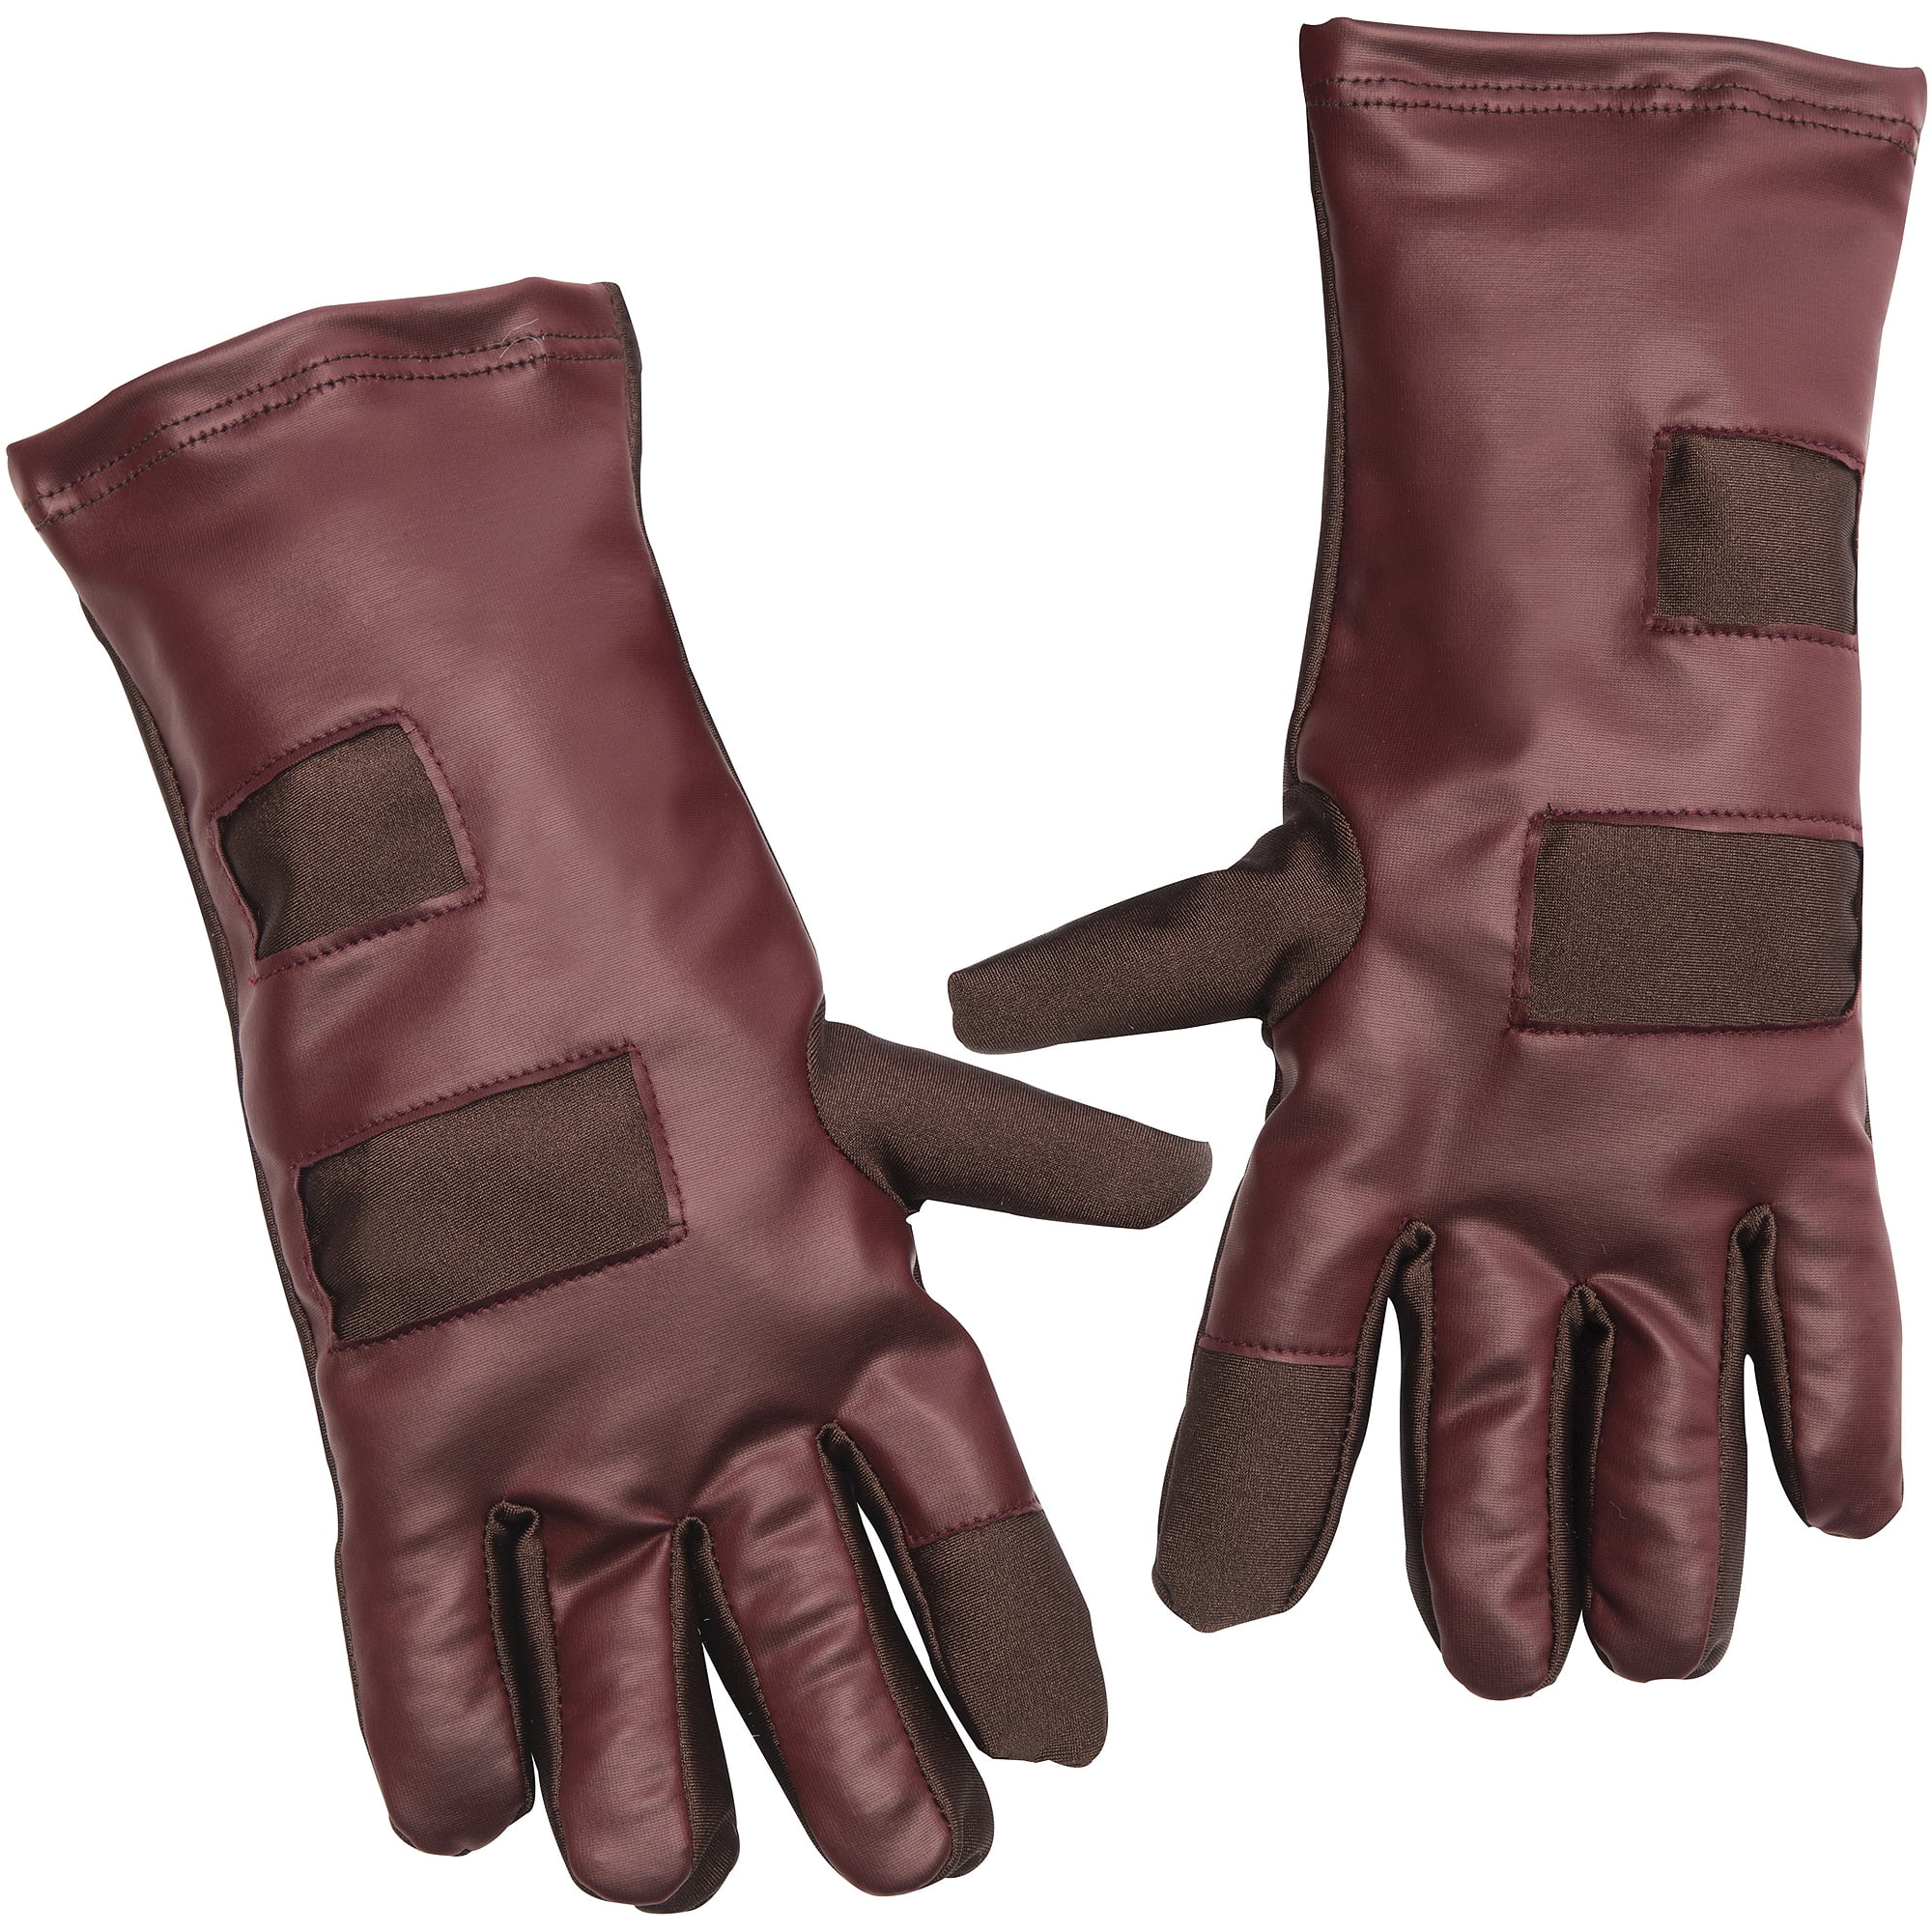 Marvel Guardians Of The Galaxy Vol 2 Star-Lord Adult Gloves Licensed Accessory